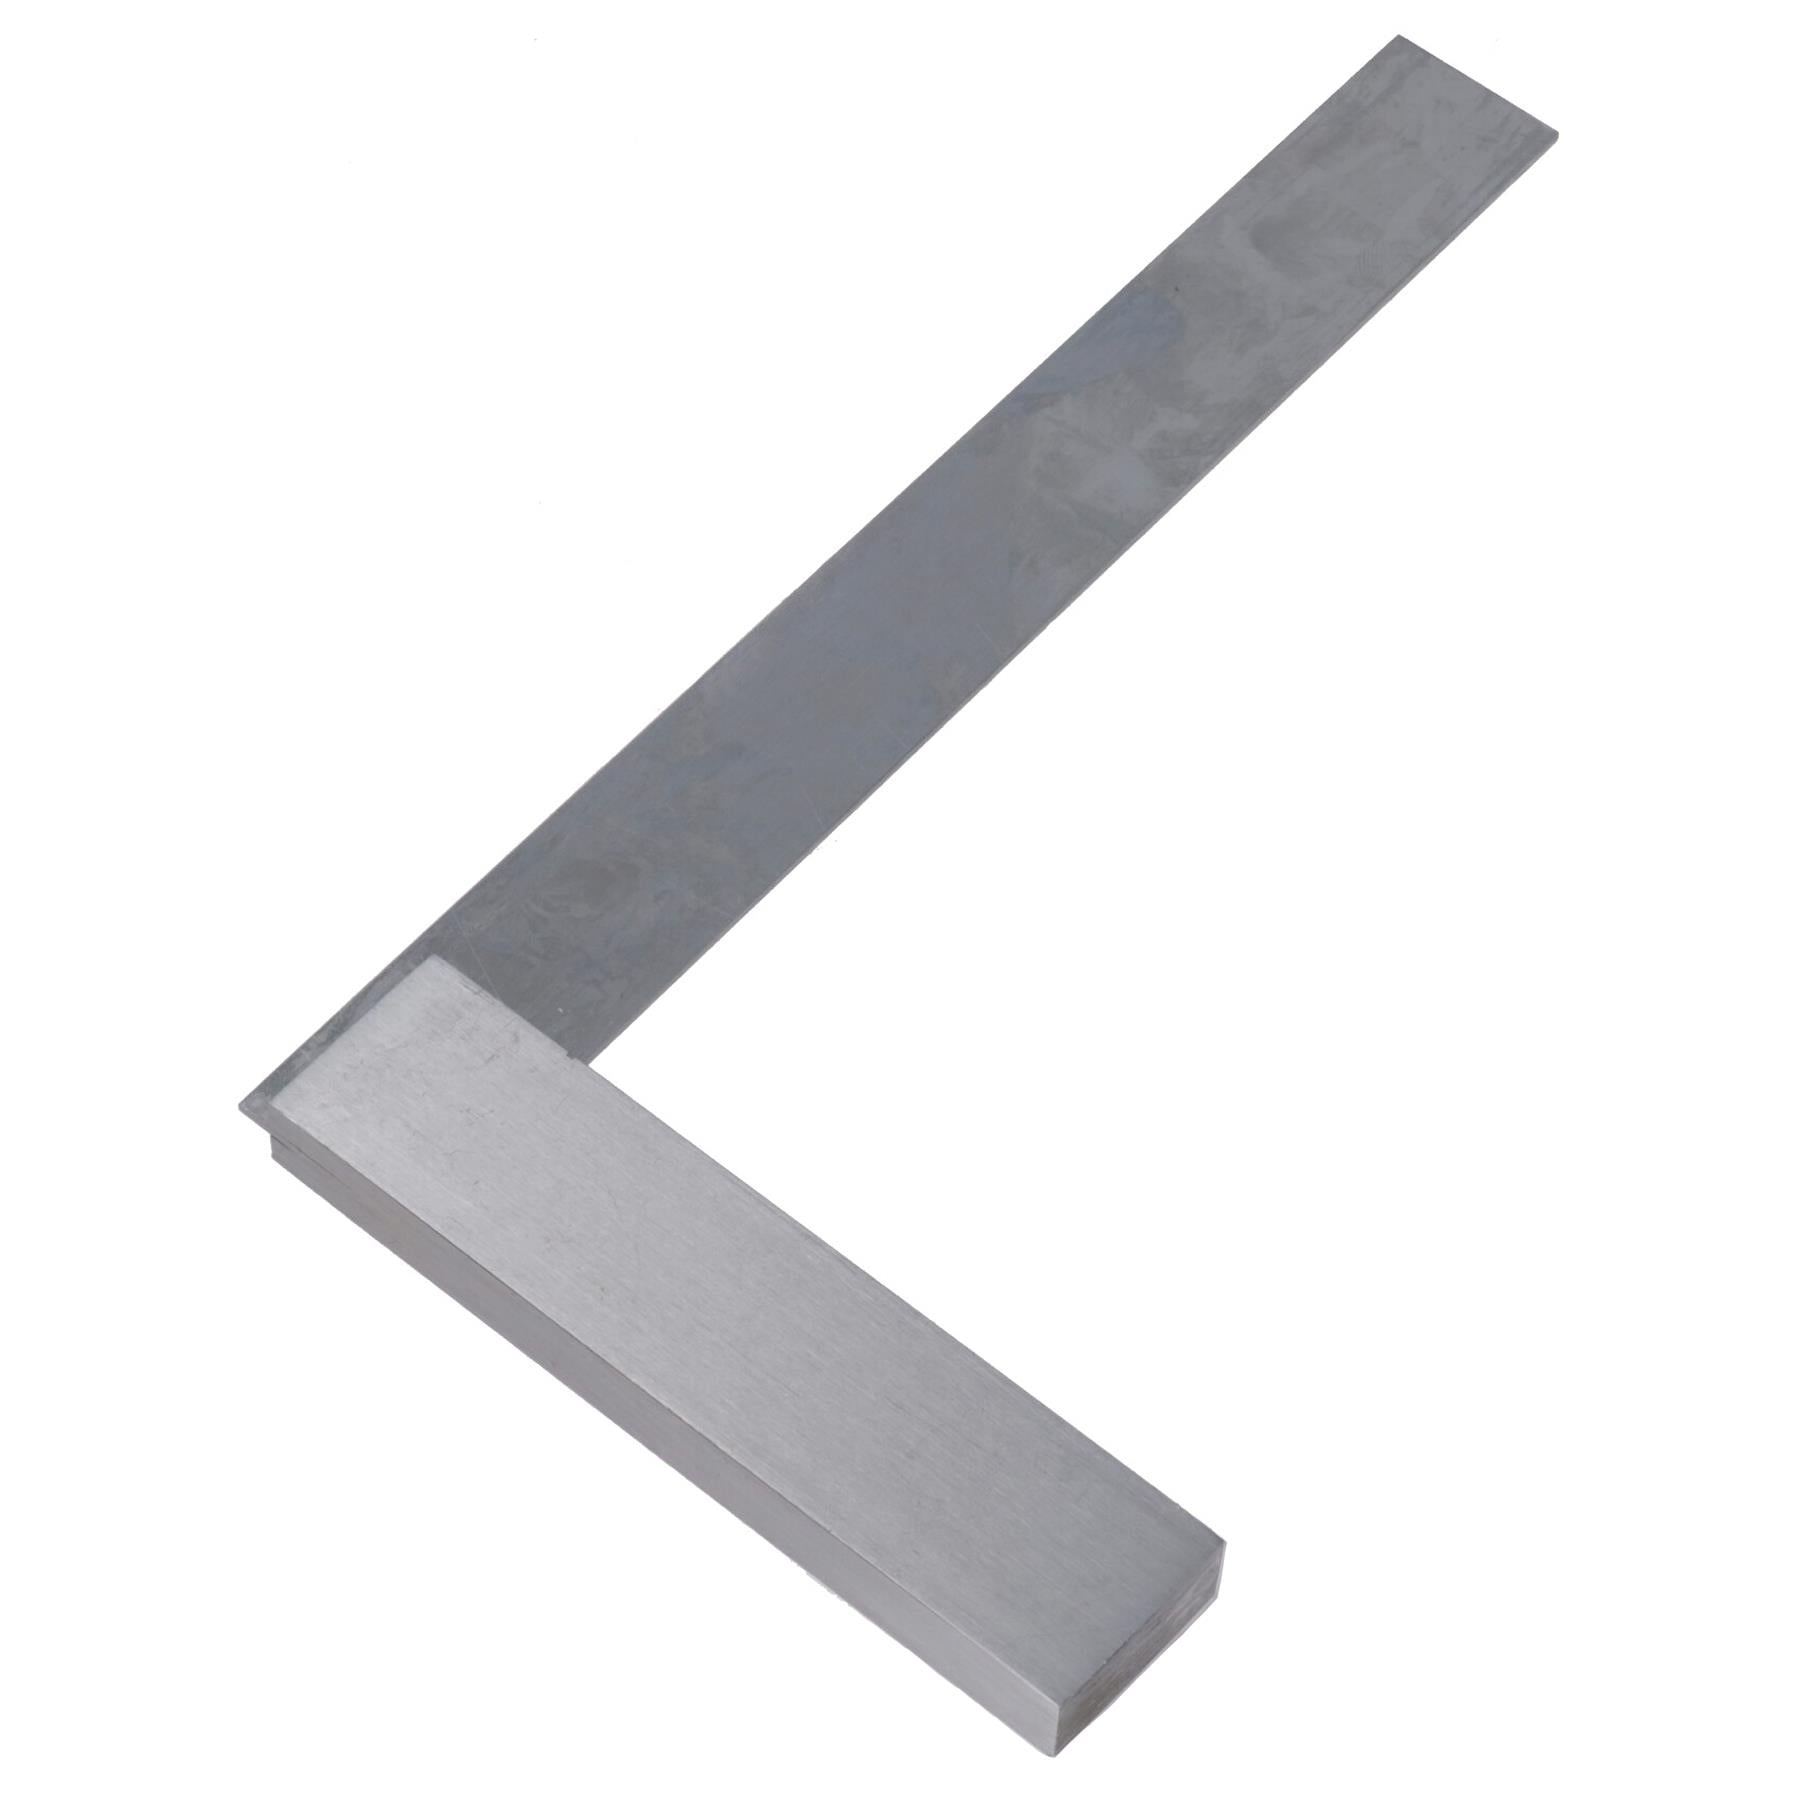 3 + 8 Inch 75 / 200mm Engineer Tri Set Square Right Angle Straight Edge Stainless